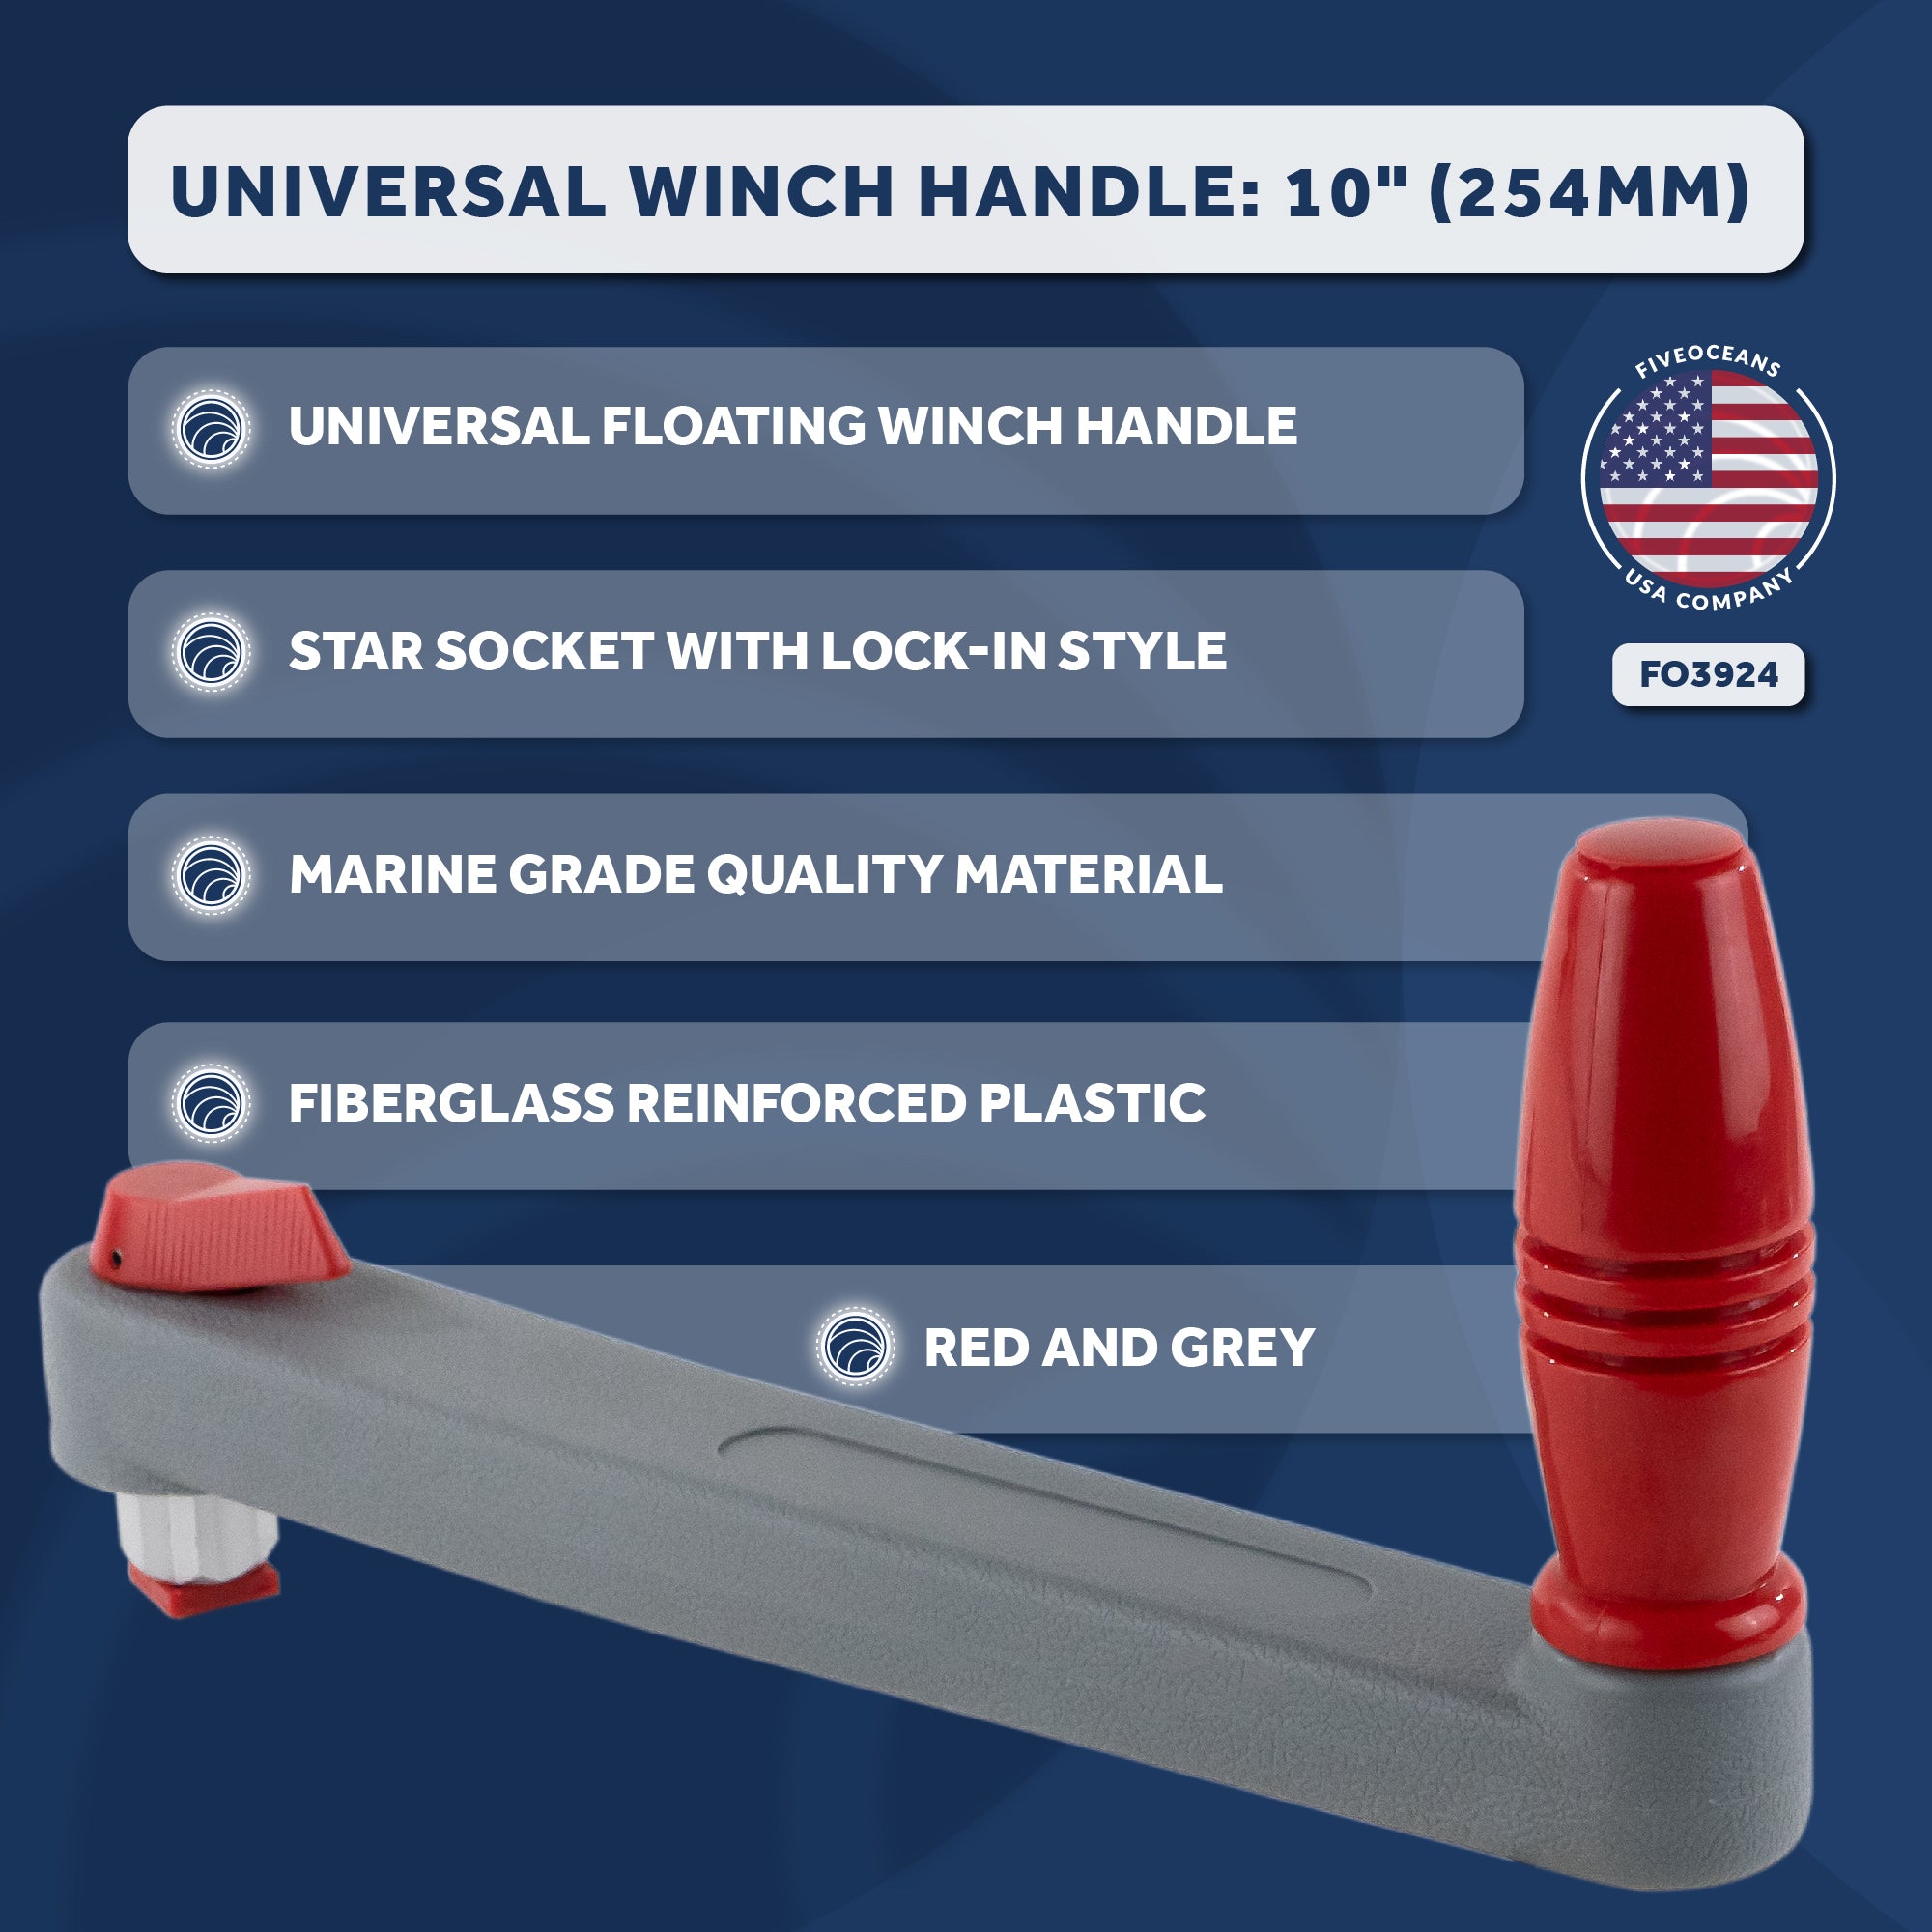 Universal Winch Handle, 10" Floating Lock-in Style, Grey/Red - FO3924